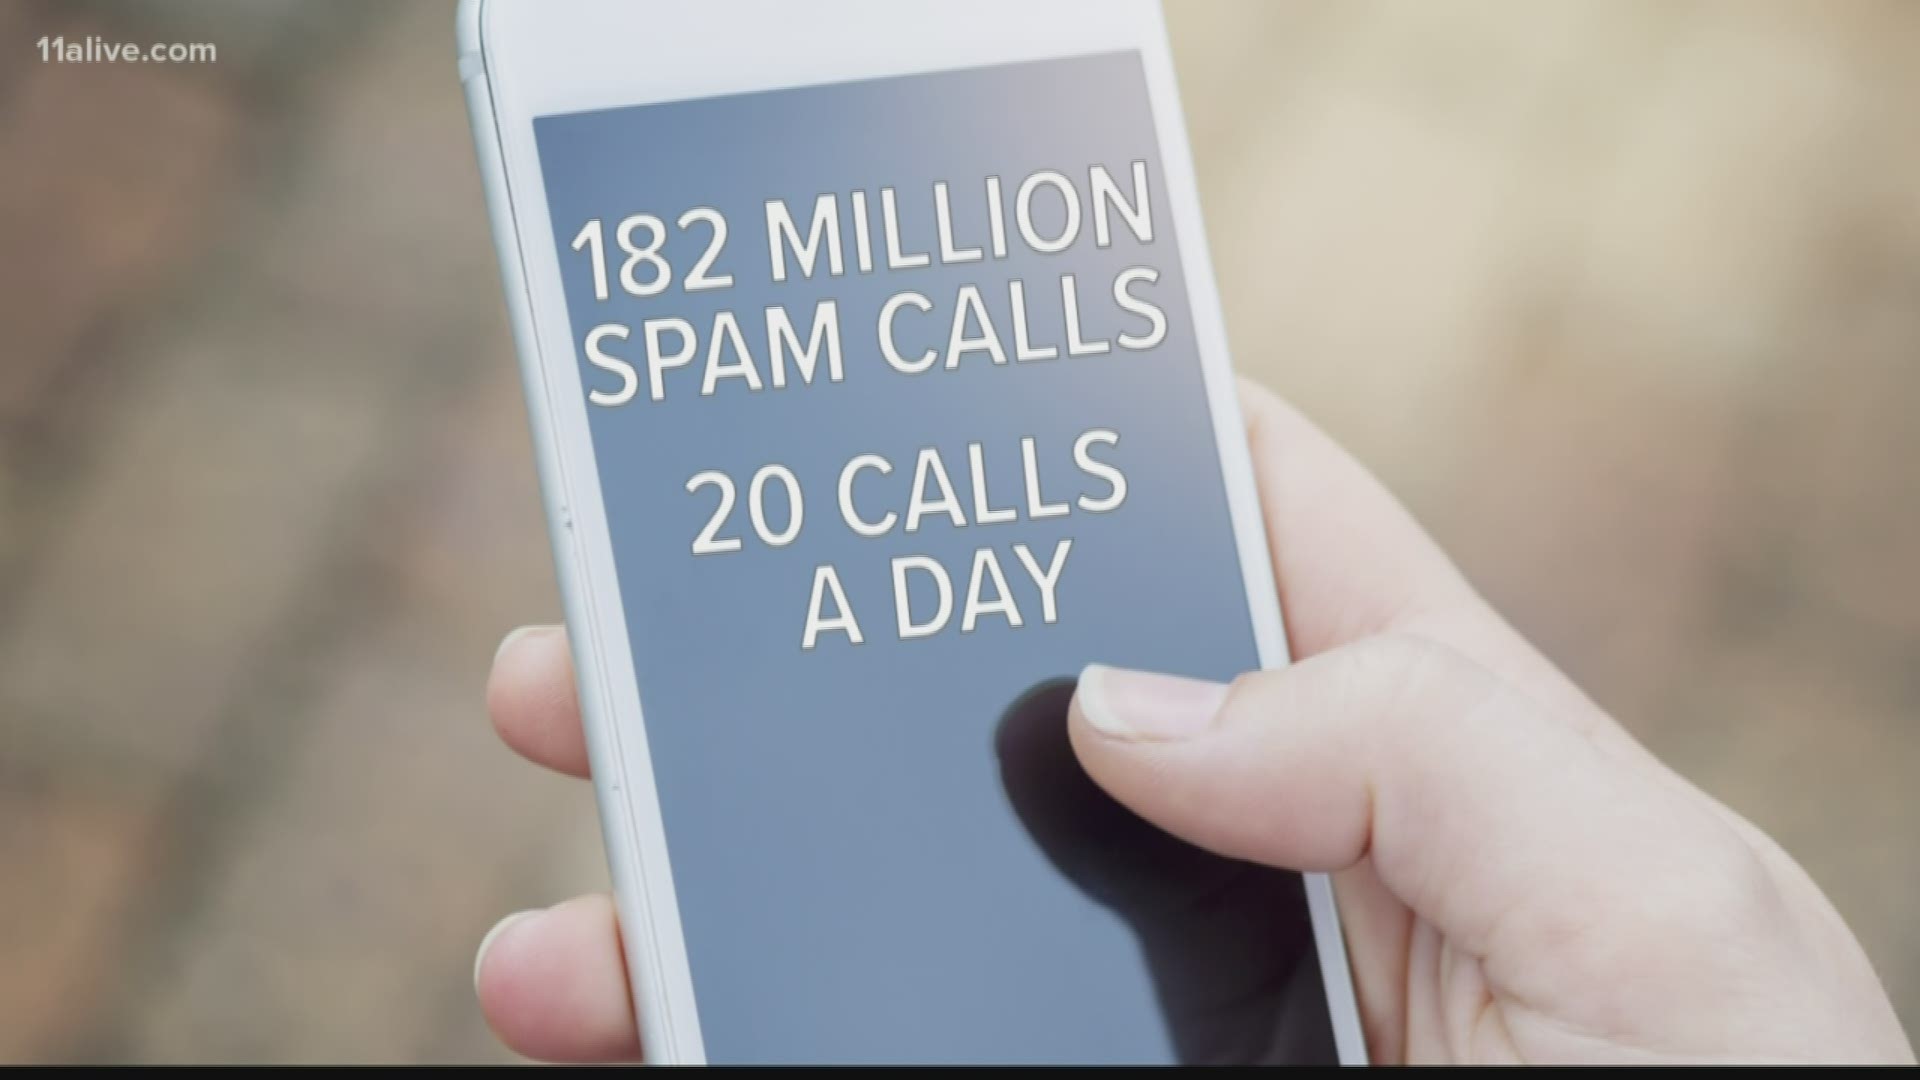 Atlanta leads the nation in robocalls, according to data from YouMail.